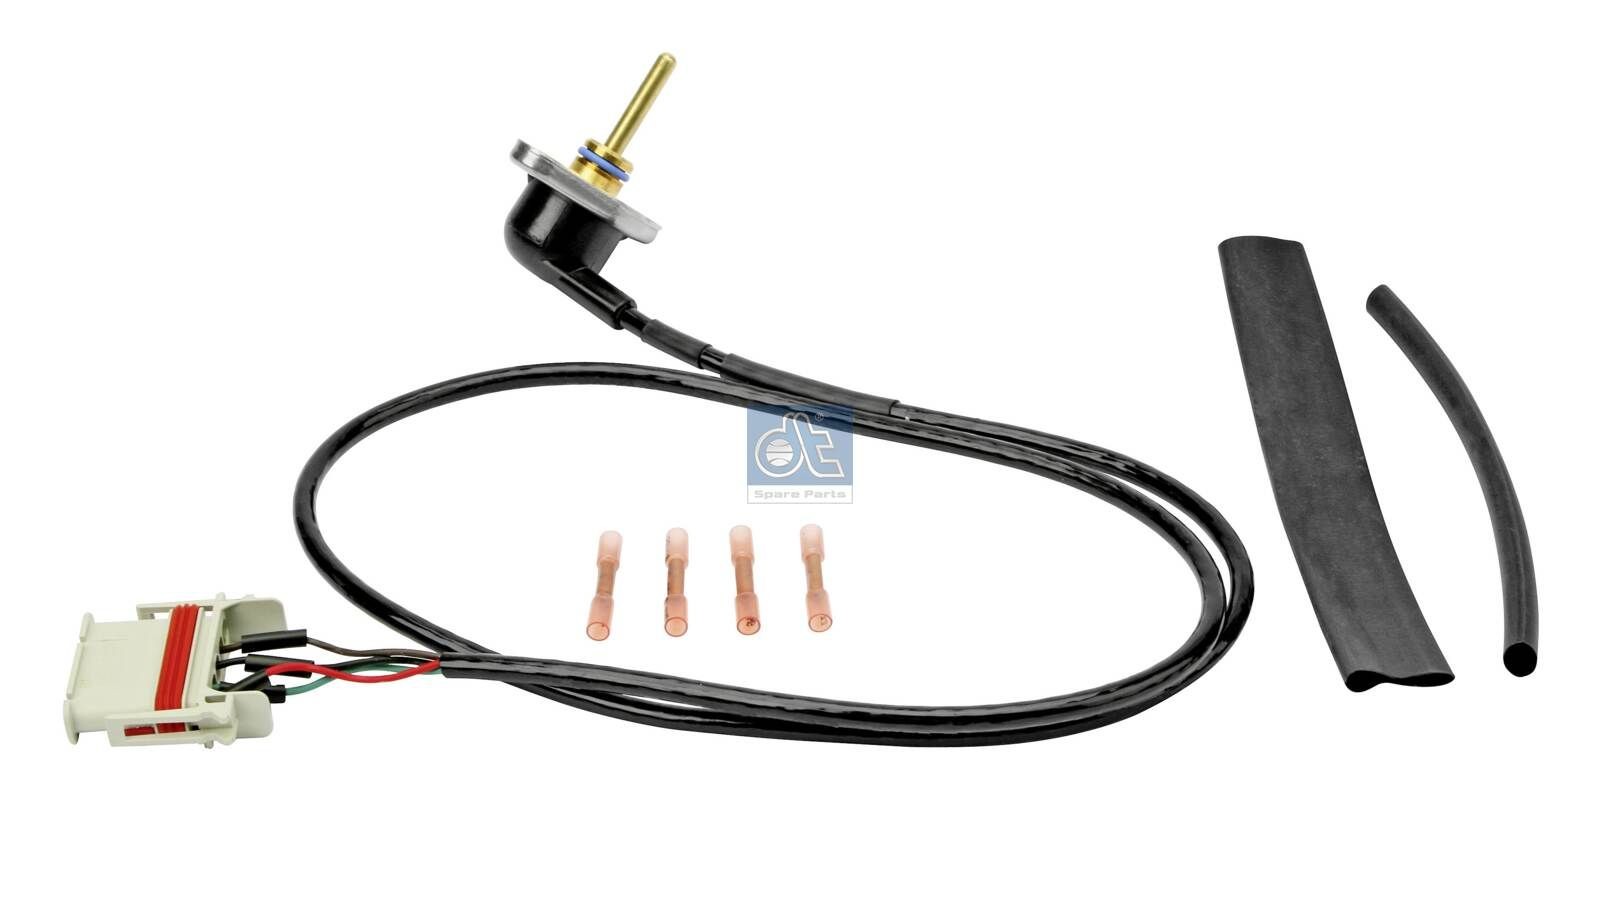 Original 1.11264 DT Spare Parts Boost pressure sensor experience and price